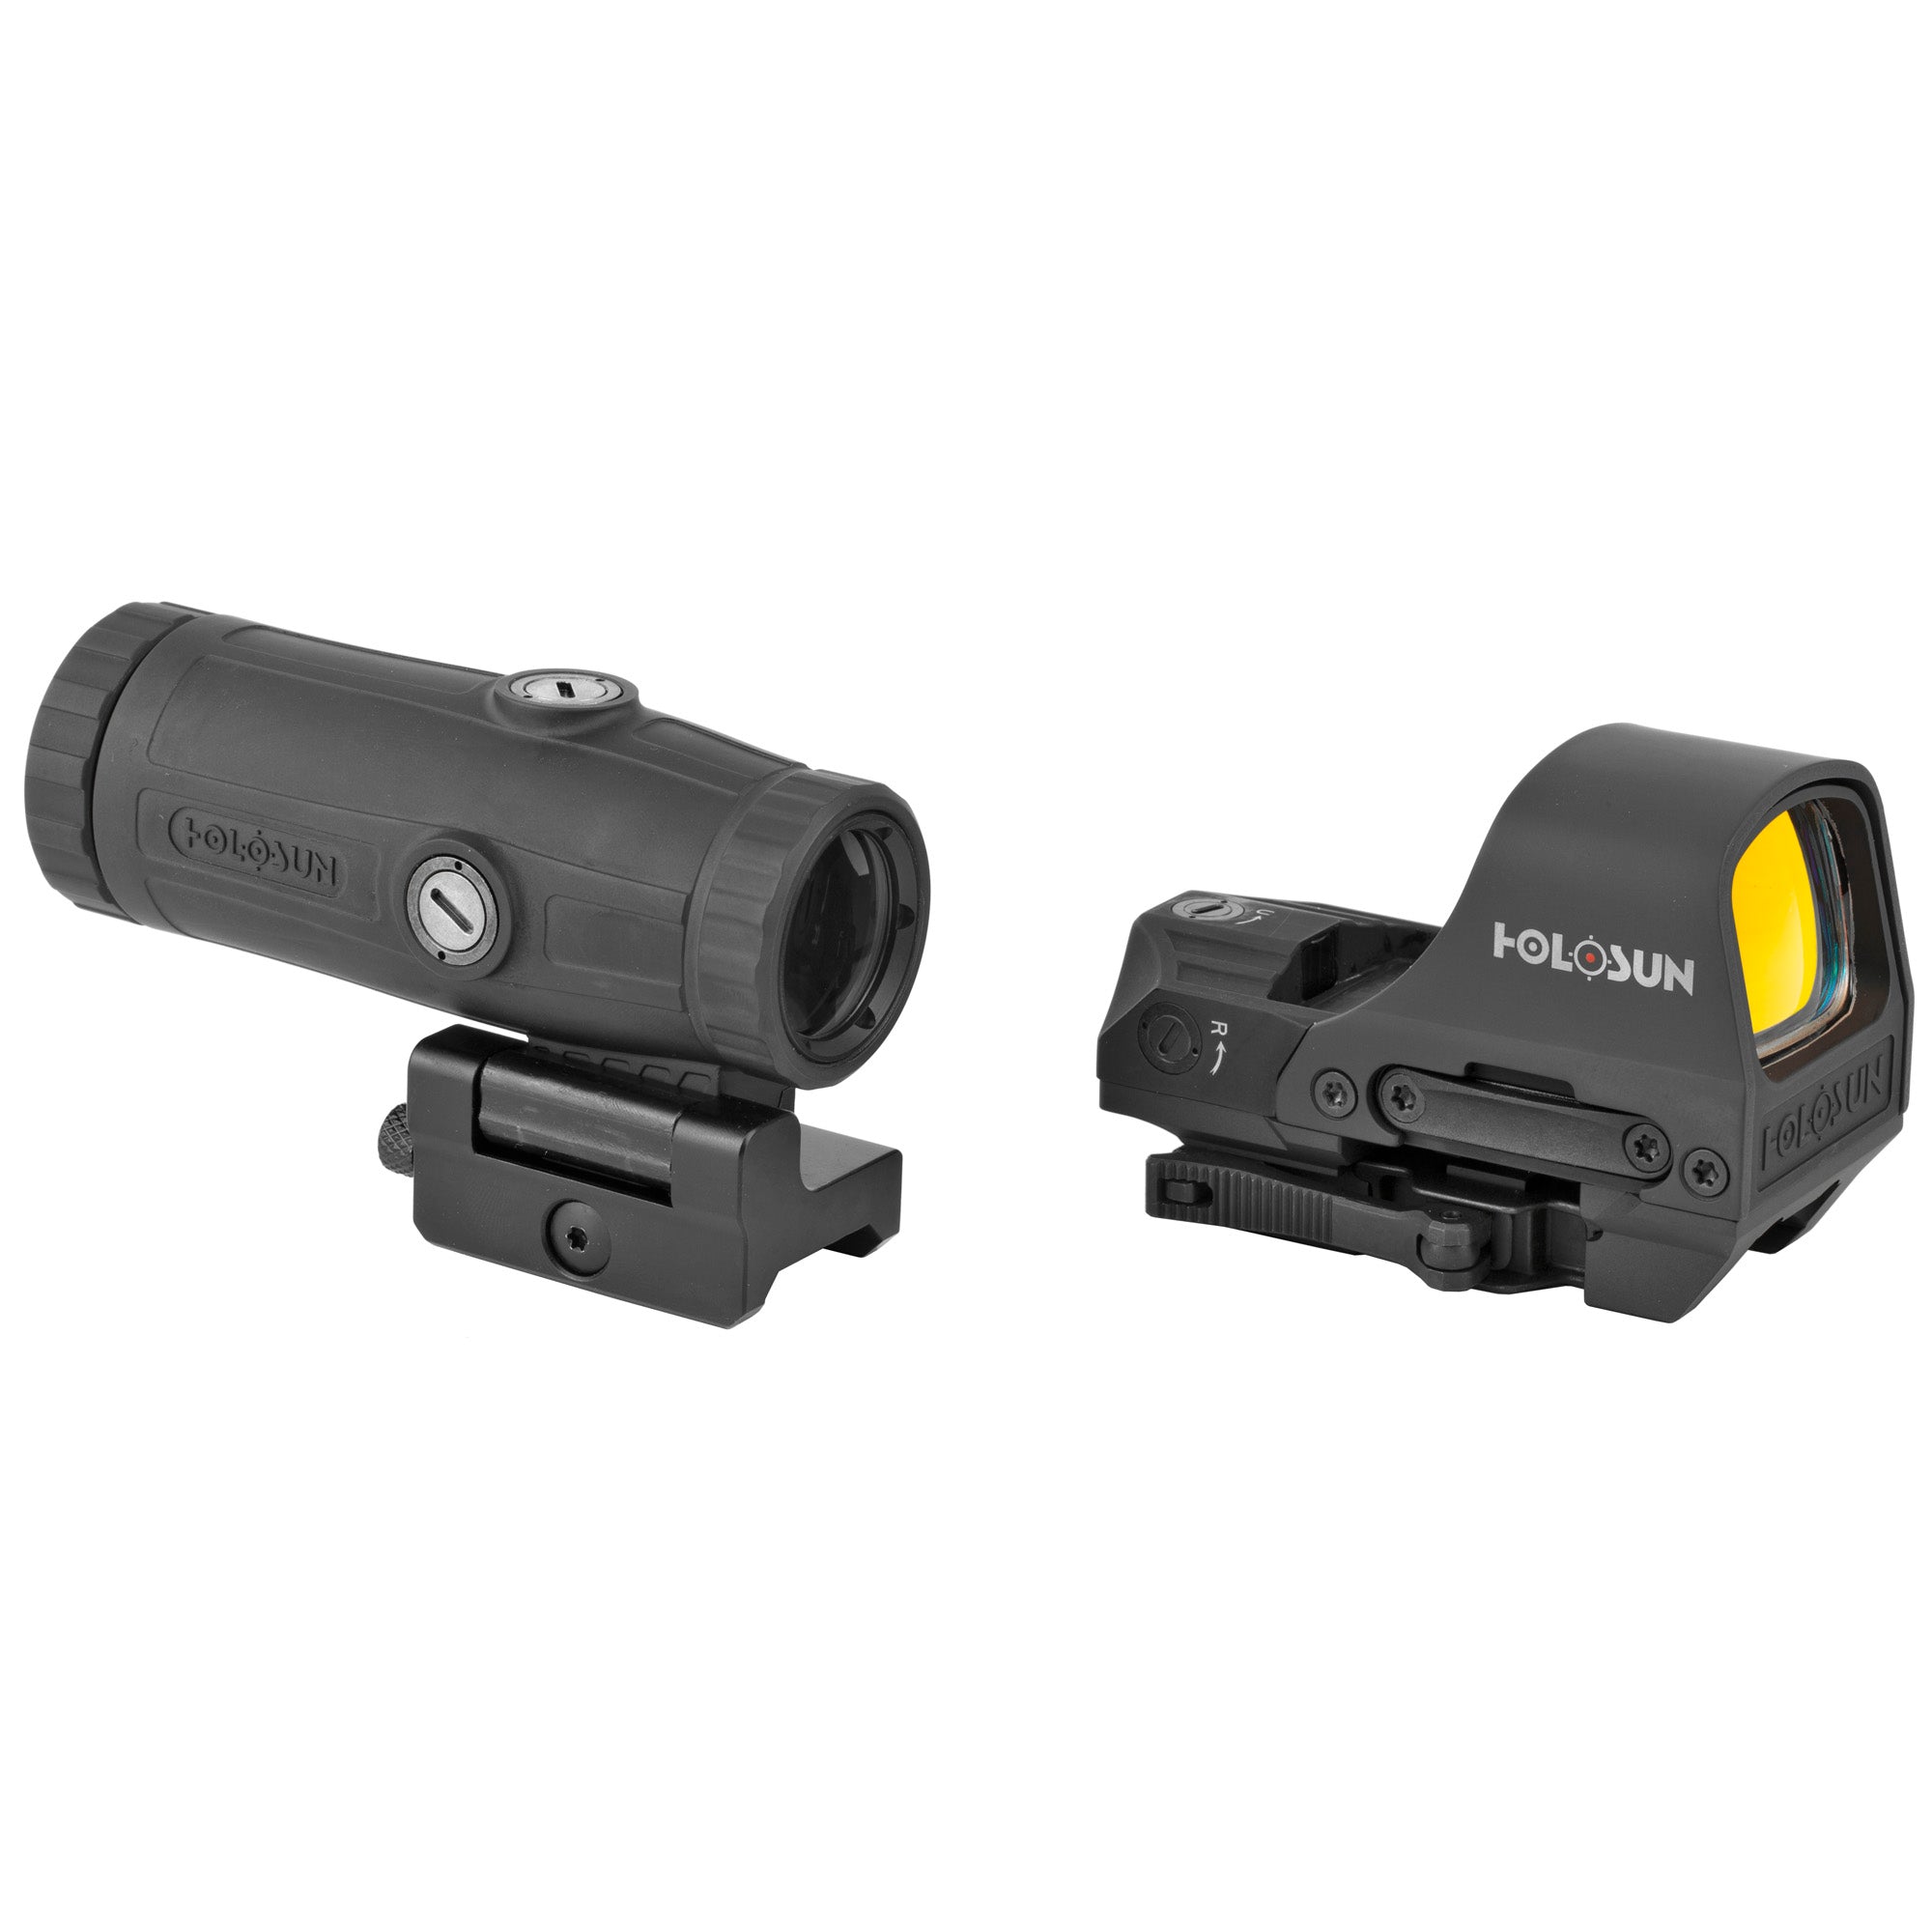 Holosun HS510C Red Dot Open Reflex Sight and HM3X Magnifier Combo Pack - 510C+HM3X